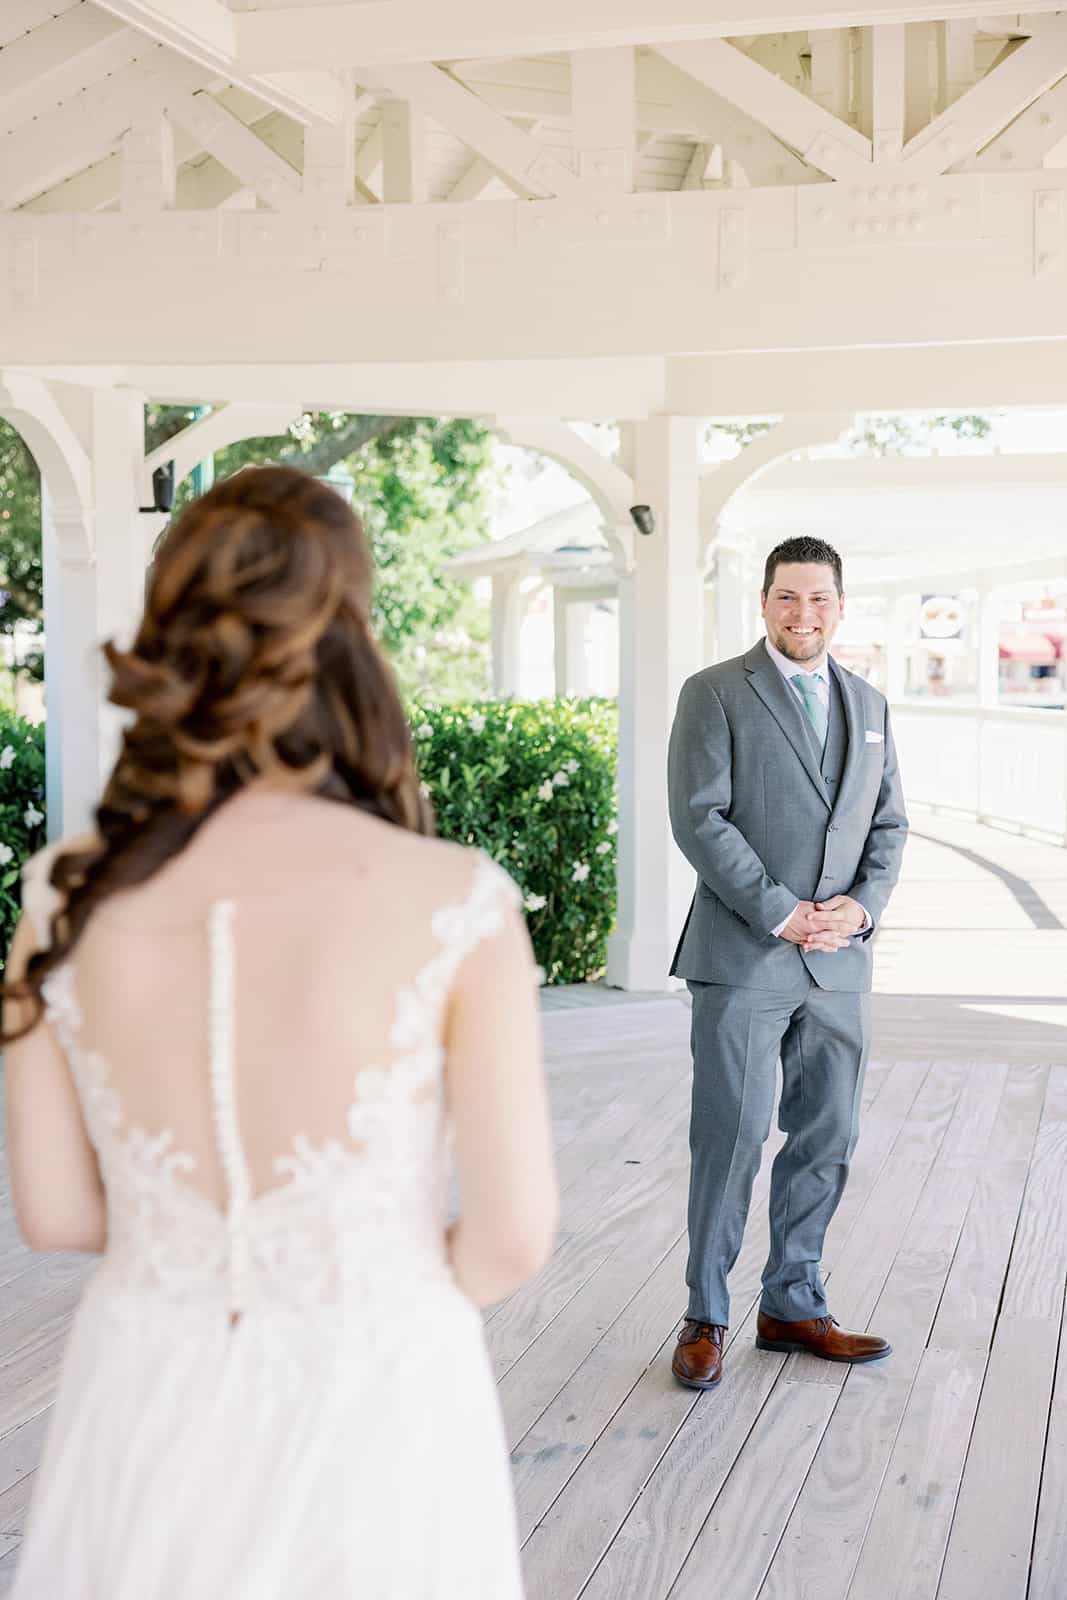 Outdoor Wedding Ceremony - Just Marry Weddings - KMD Photo + Film - First Look